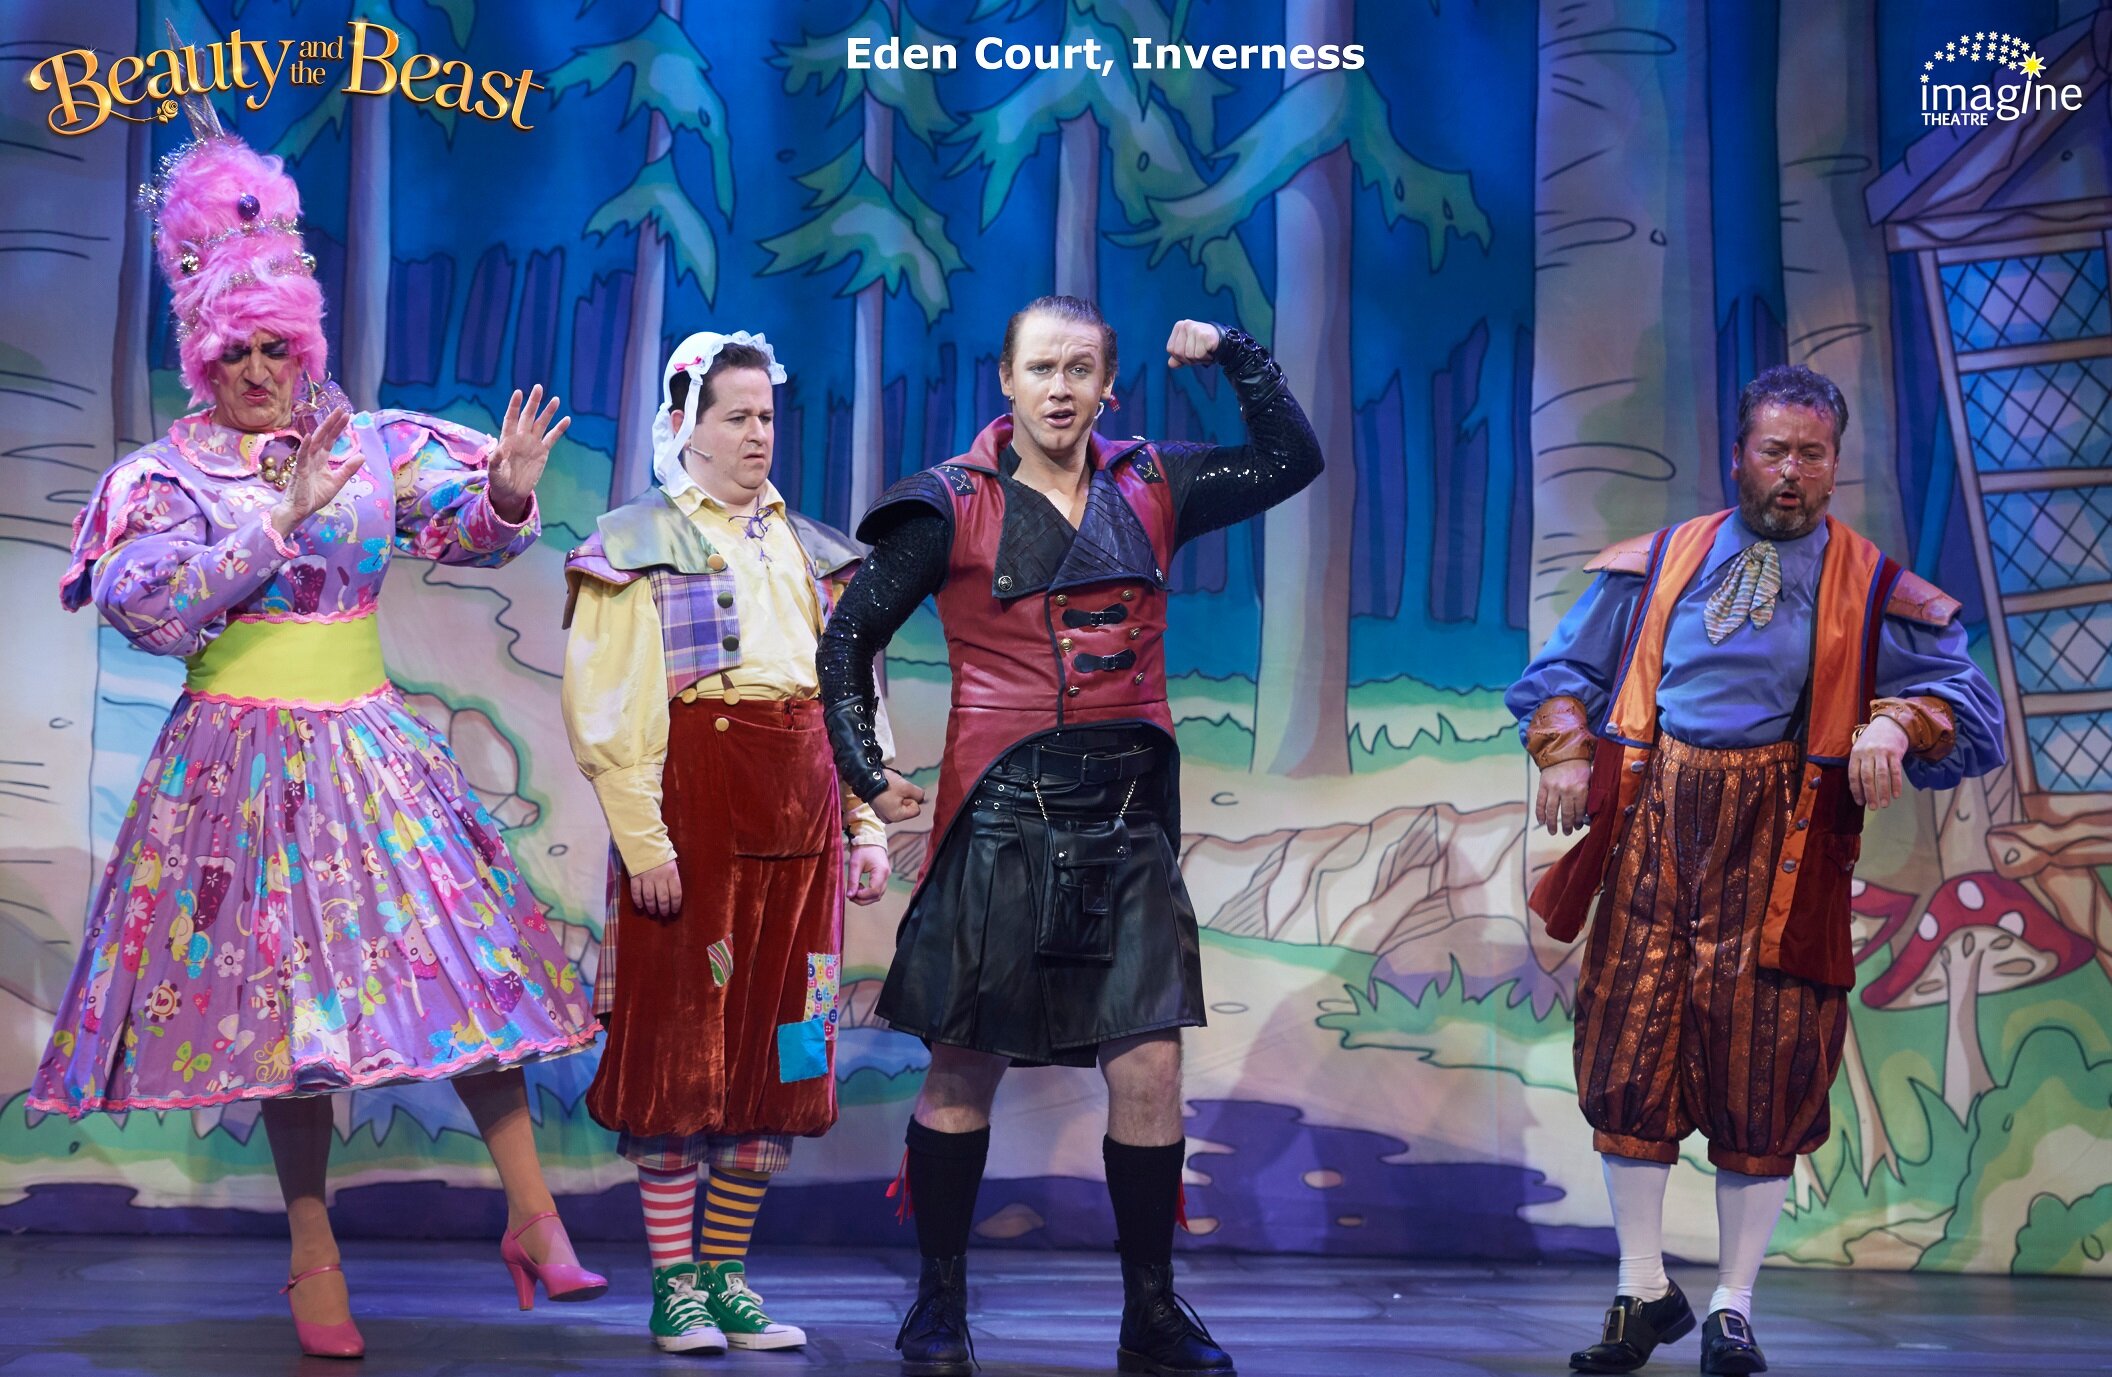  Beauty and the Beast, Eden Court 2019 Panto 